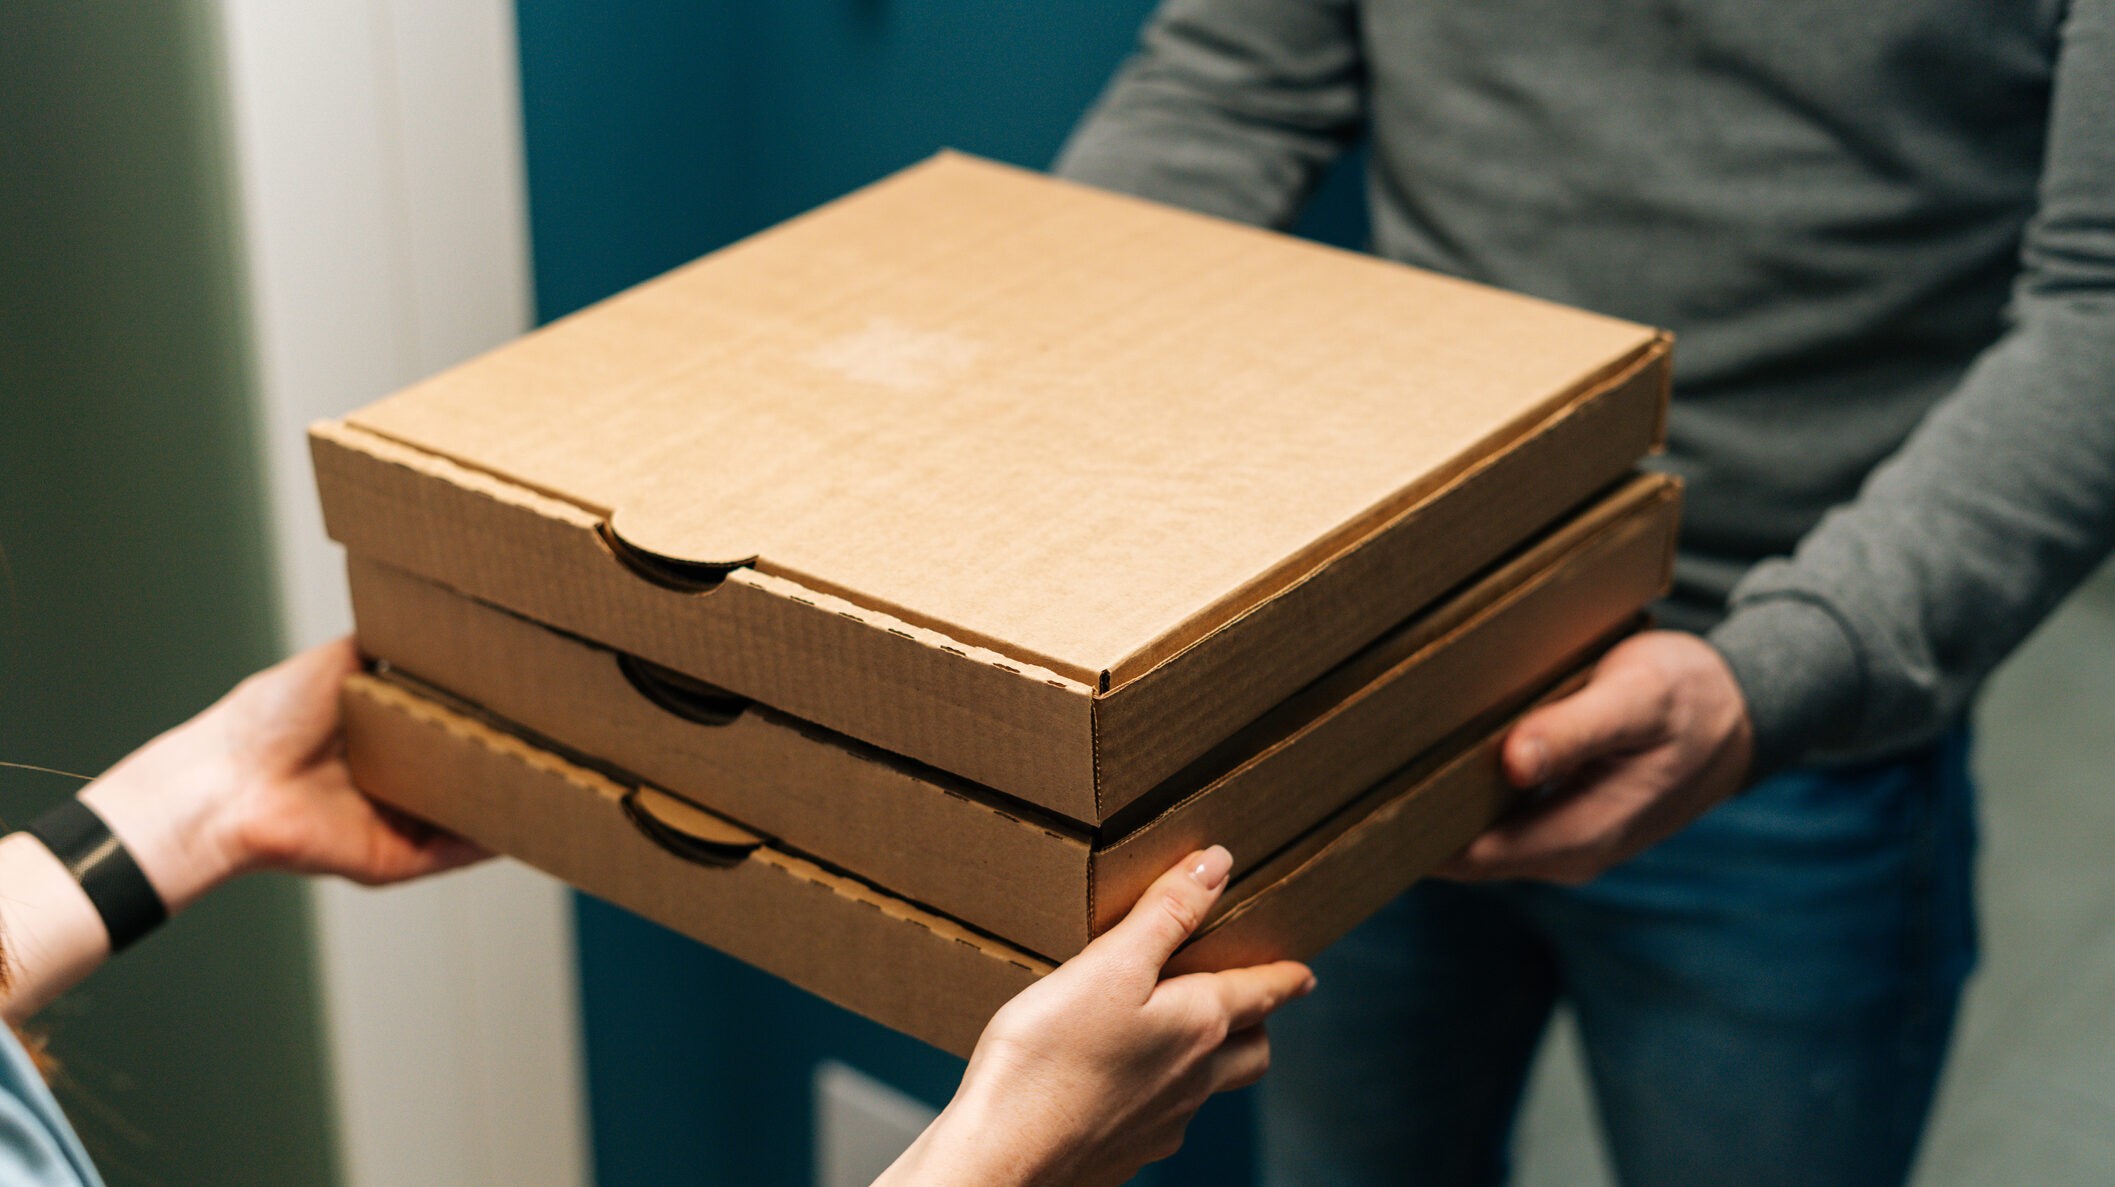 Boxes of pizza in Mr. Gatti's Pizza Franchise serve up delicious pizza and deliver memorable experiences to families and communities with the pizza franchise business and family entertainment center.